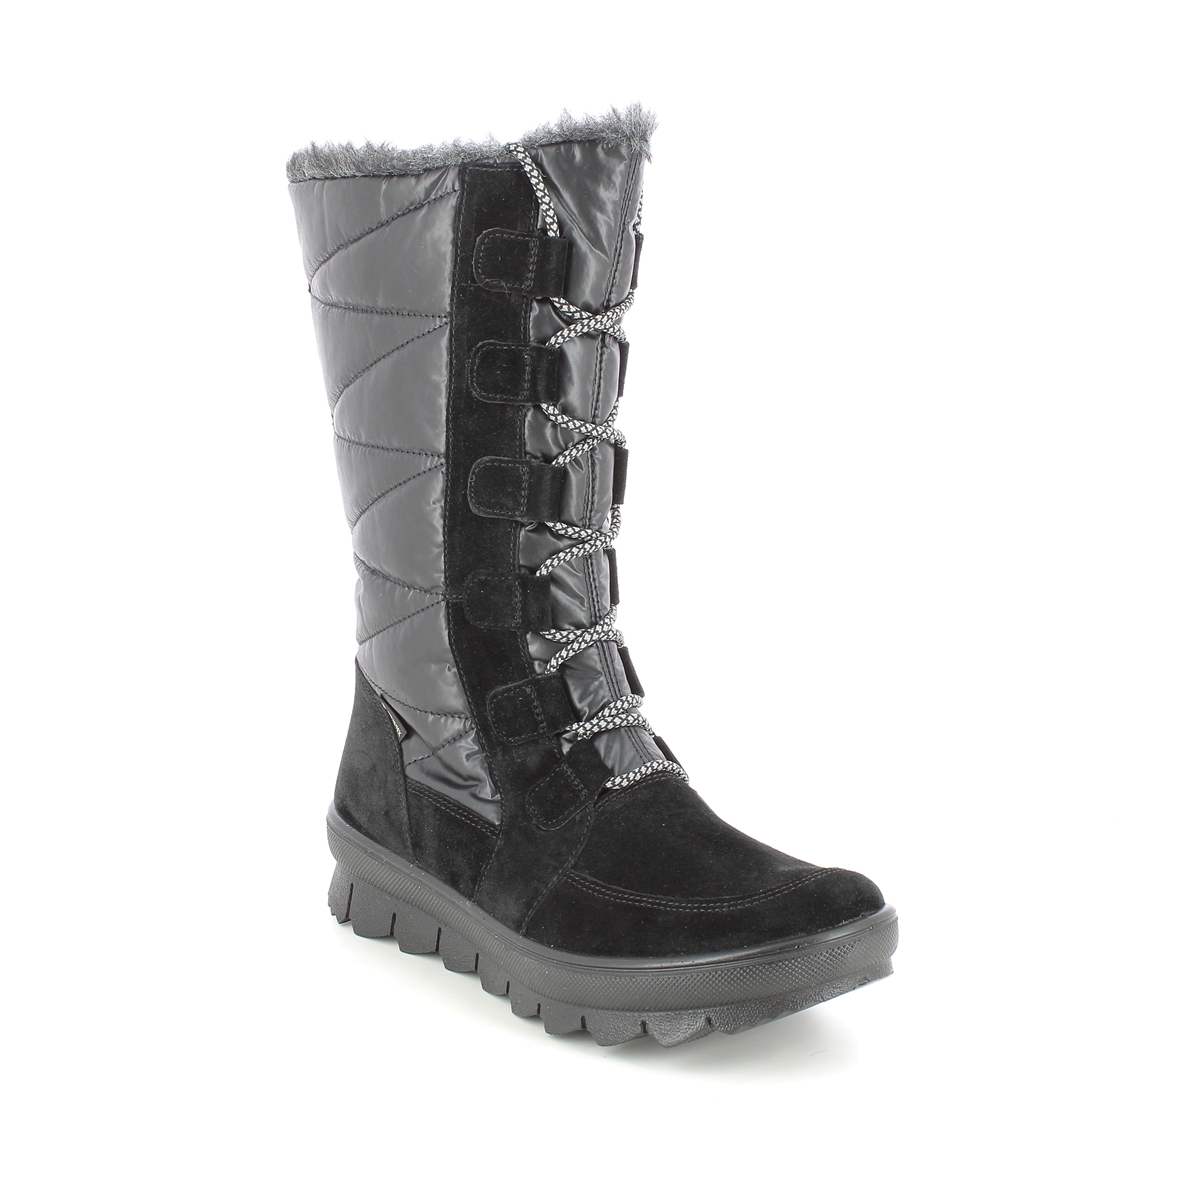 Legero Novara Hi Gtx Black suede Womens Mid Calf Boots 2009901-0000 in a Plain Leather and Man-made in Size 5.5